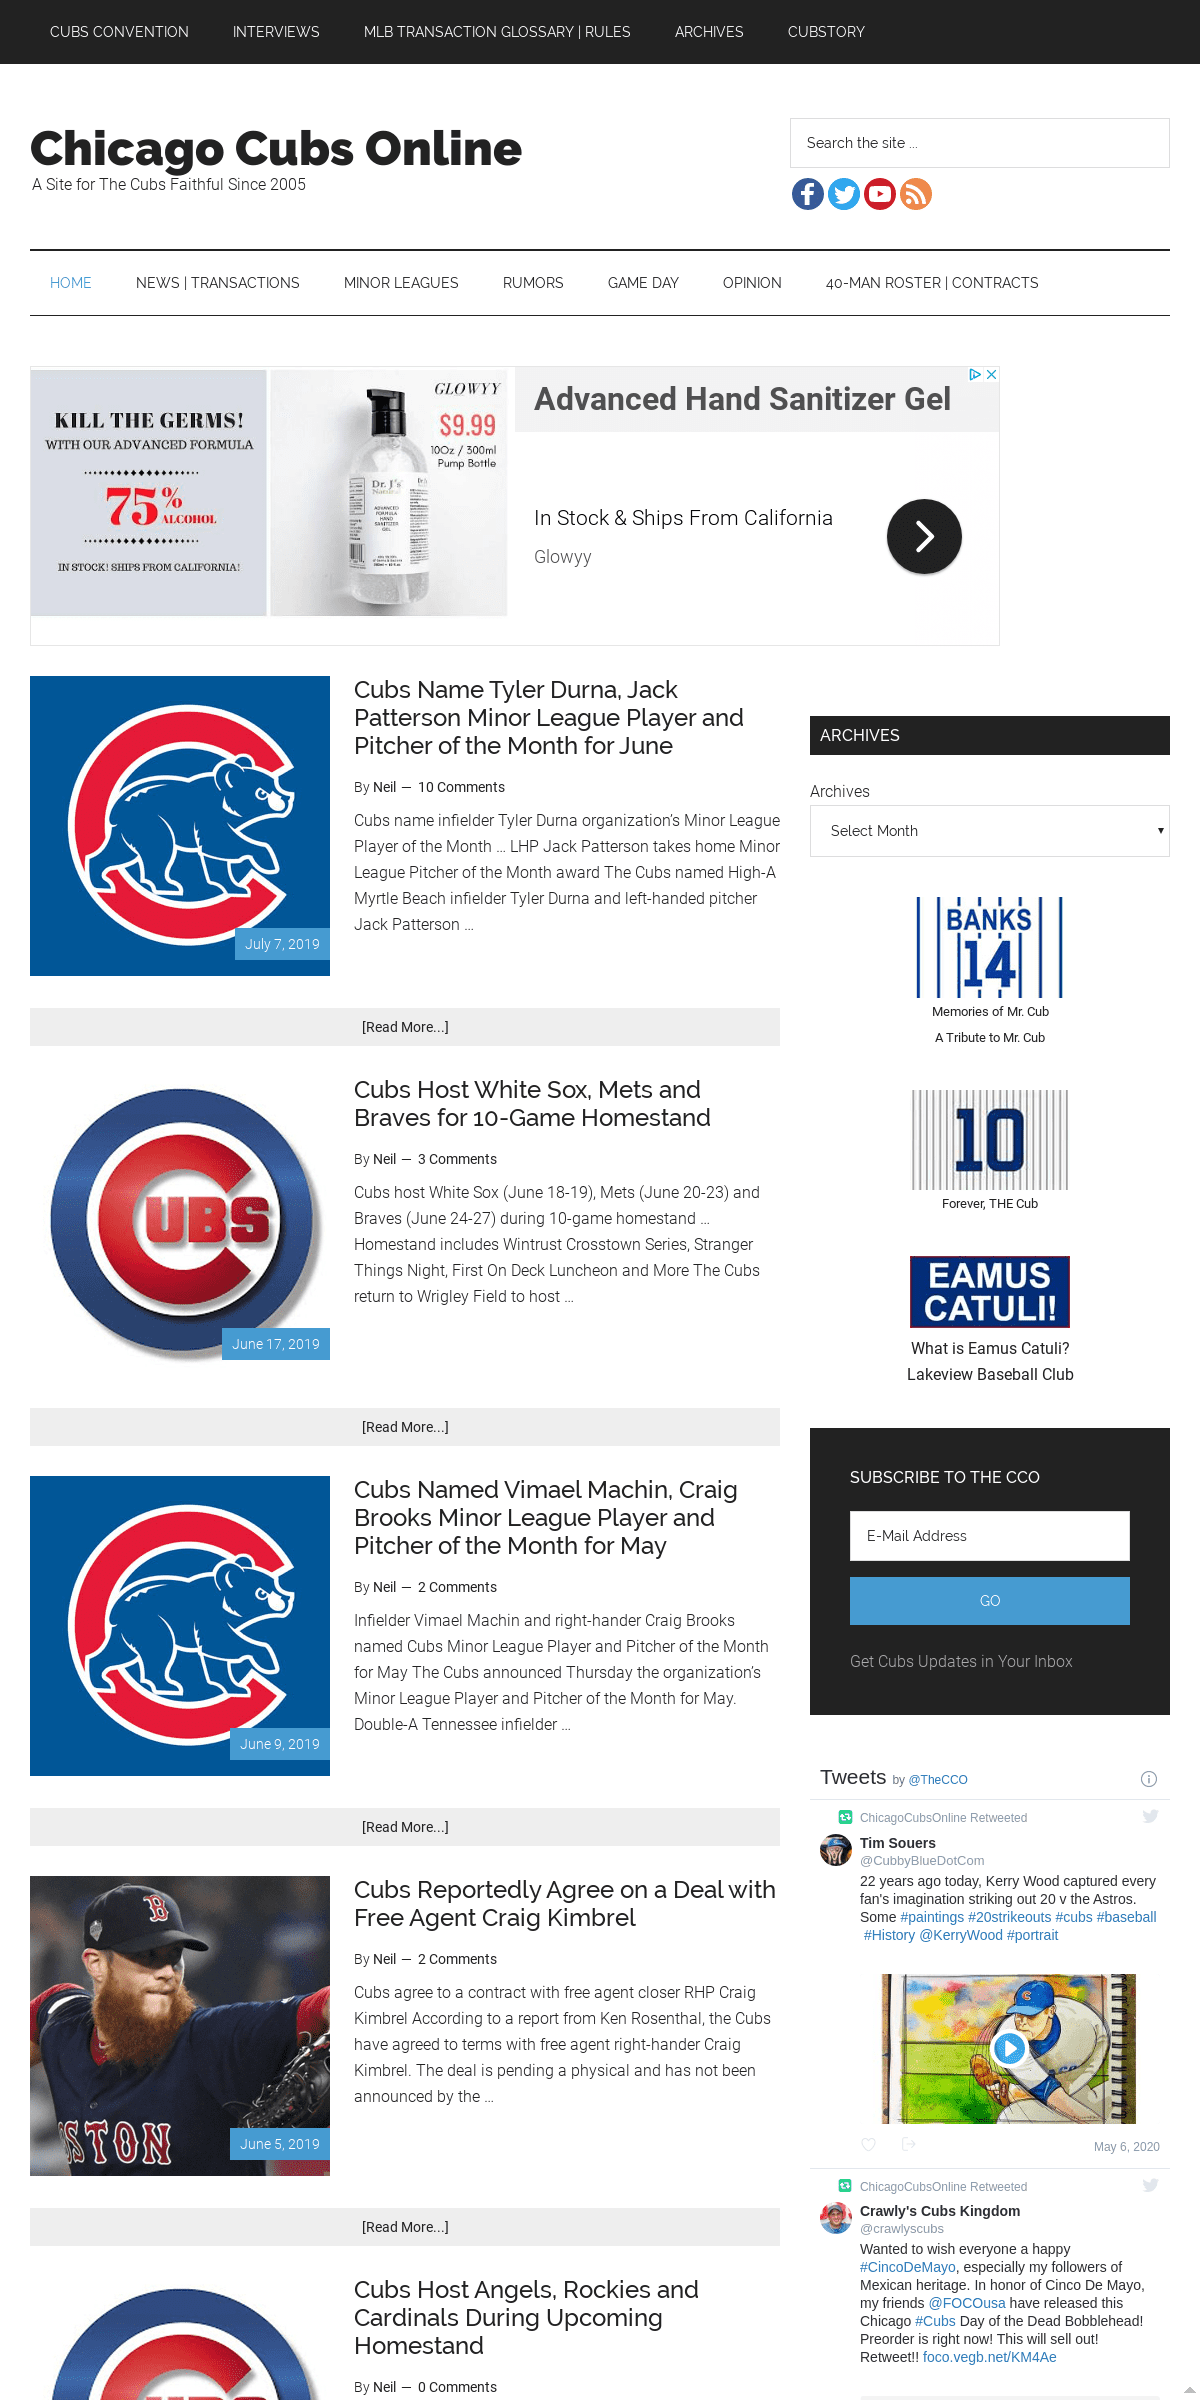 A complete backup of chicagocubsonline.com